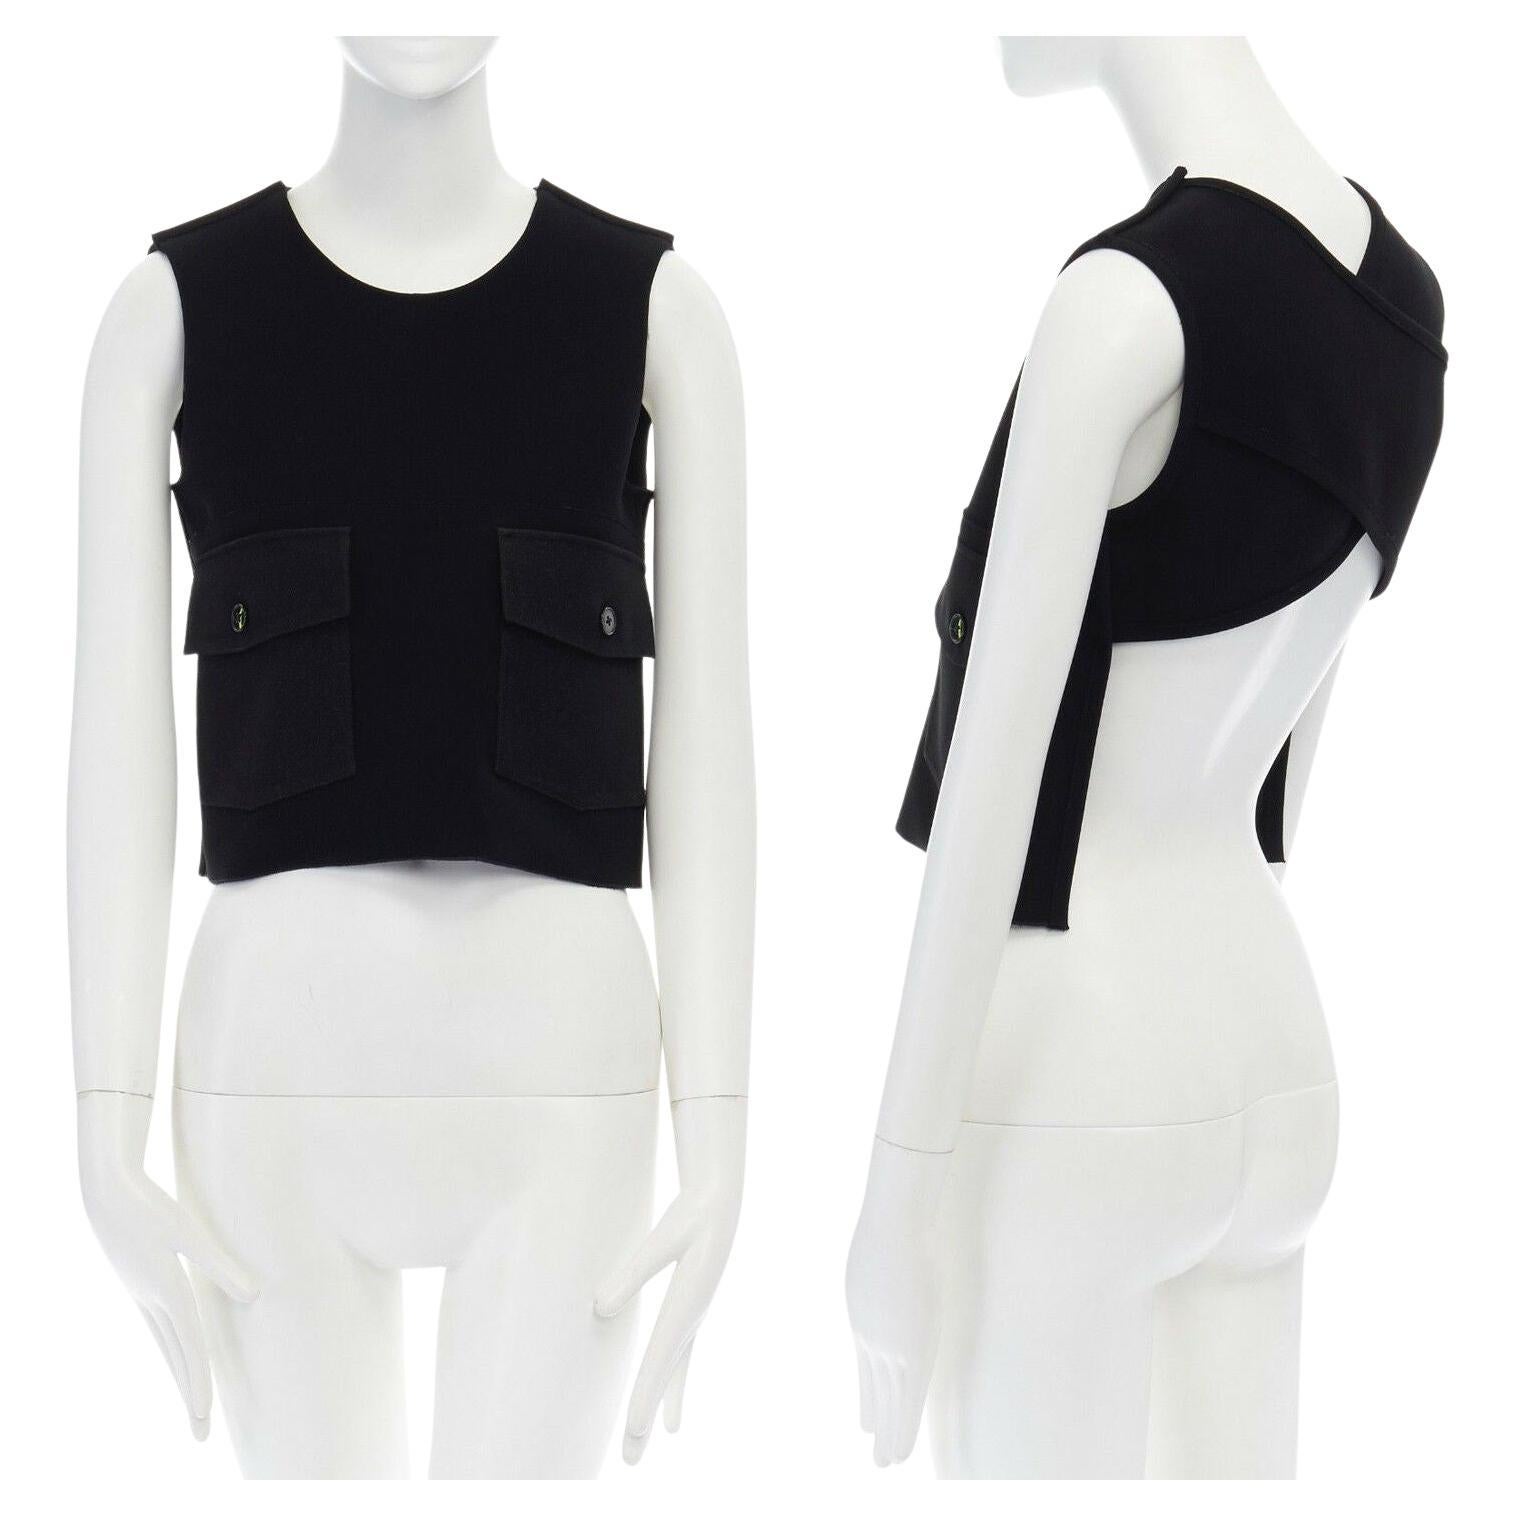 VICTORIA BECKHAM black crepe dual cargo pocket cross strap open back crop top S Reference: LNKO/A00892 
Brand: Victoria Beckham 
Designer: Victoria Beckham 
Material: Silk 
Color: Black 
Pattern: Solid 
Extra Detail: Black crepe. Dual flap front